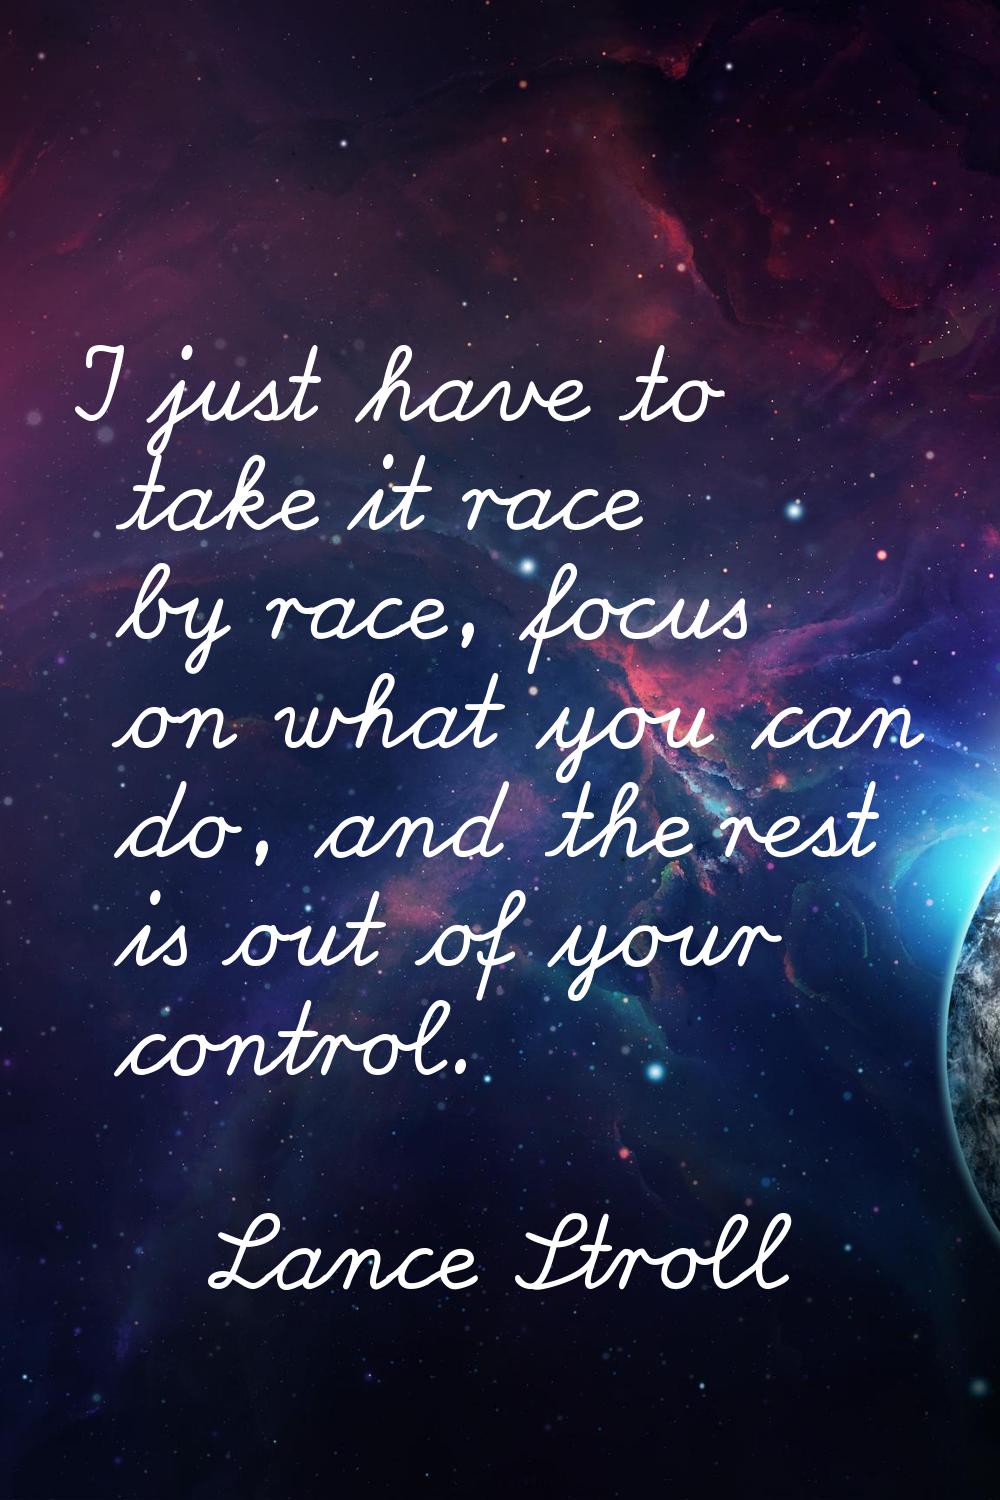 I just have to take it race by race, focus on what you can do, and the rest is out of your control.